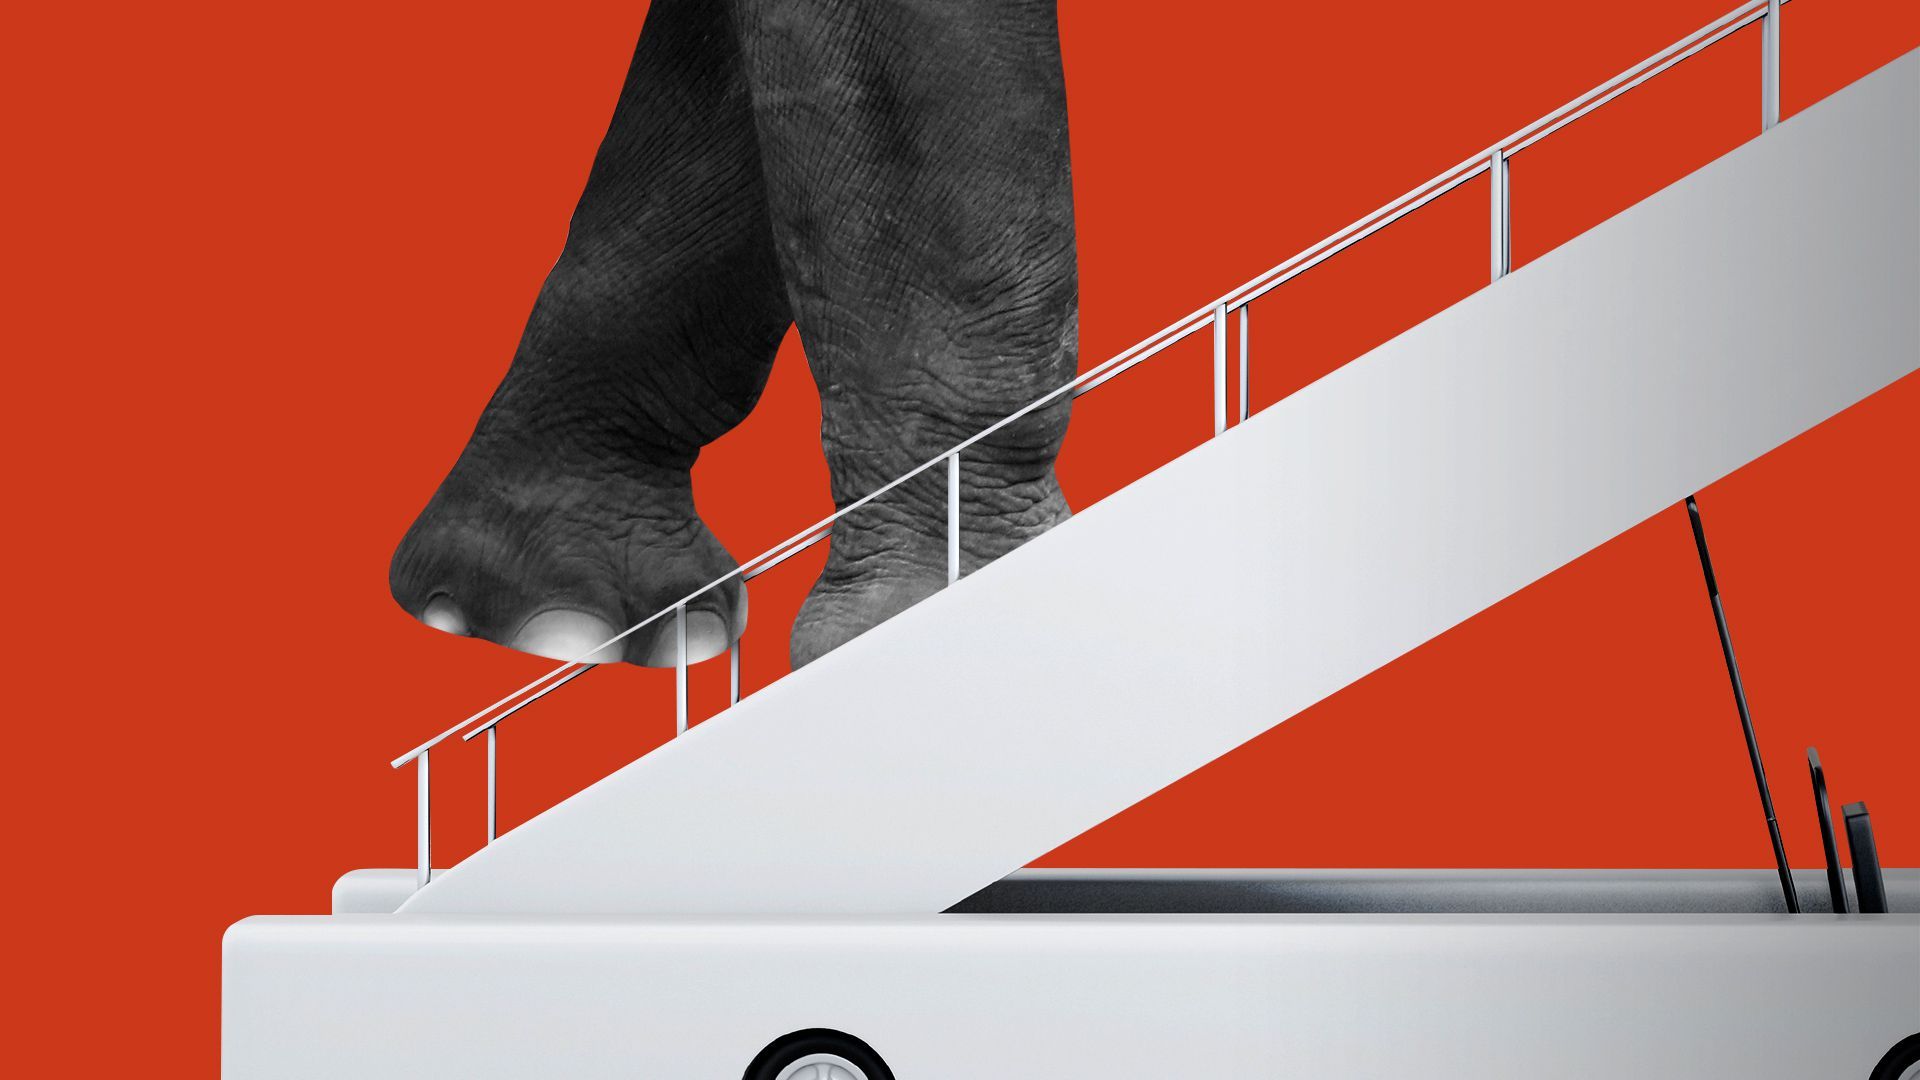 Illustration of elephant feet going up an airplane stairway.